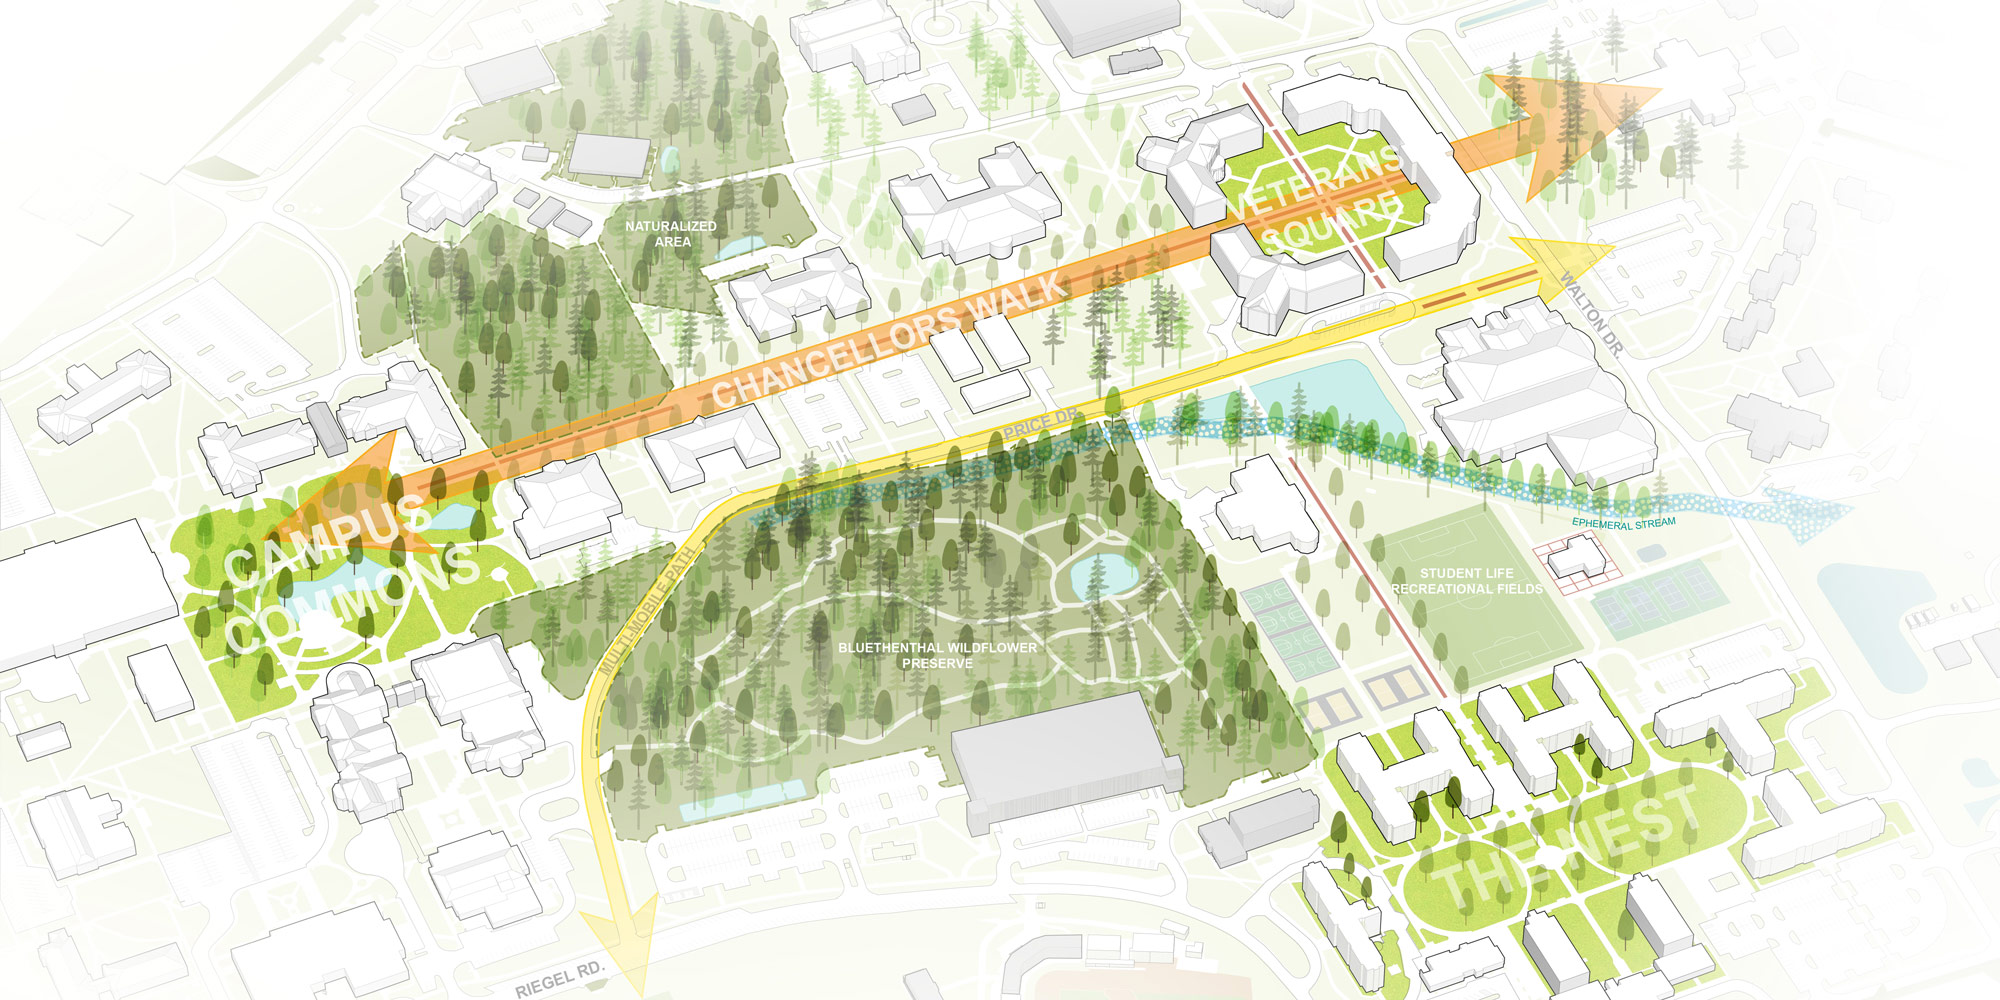 A 3-D rendering of campus showing chancellor's walk and price drive.